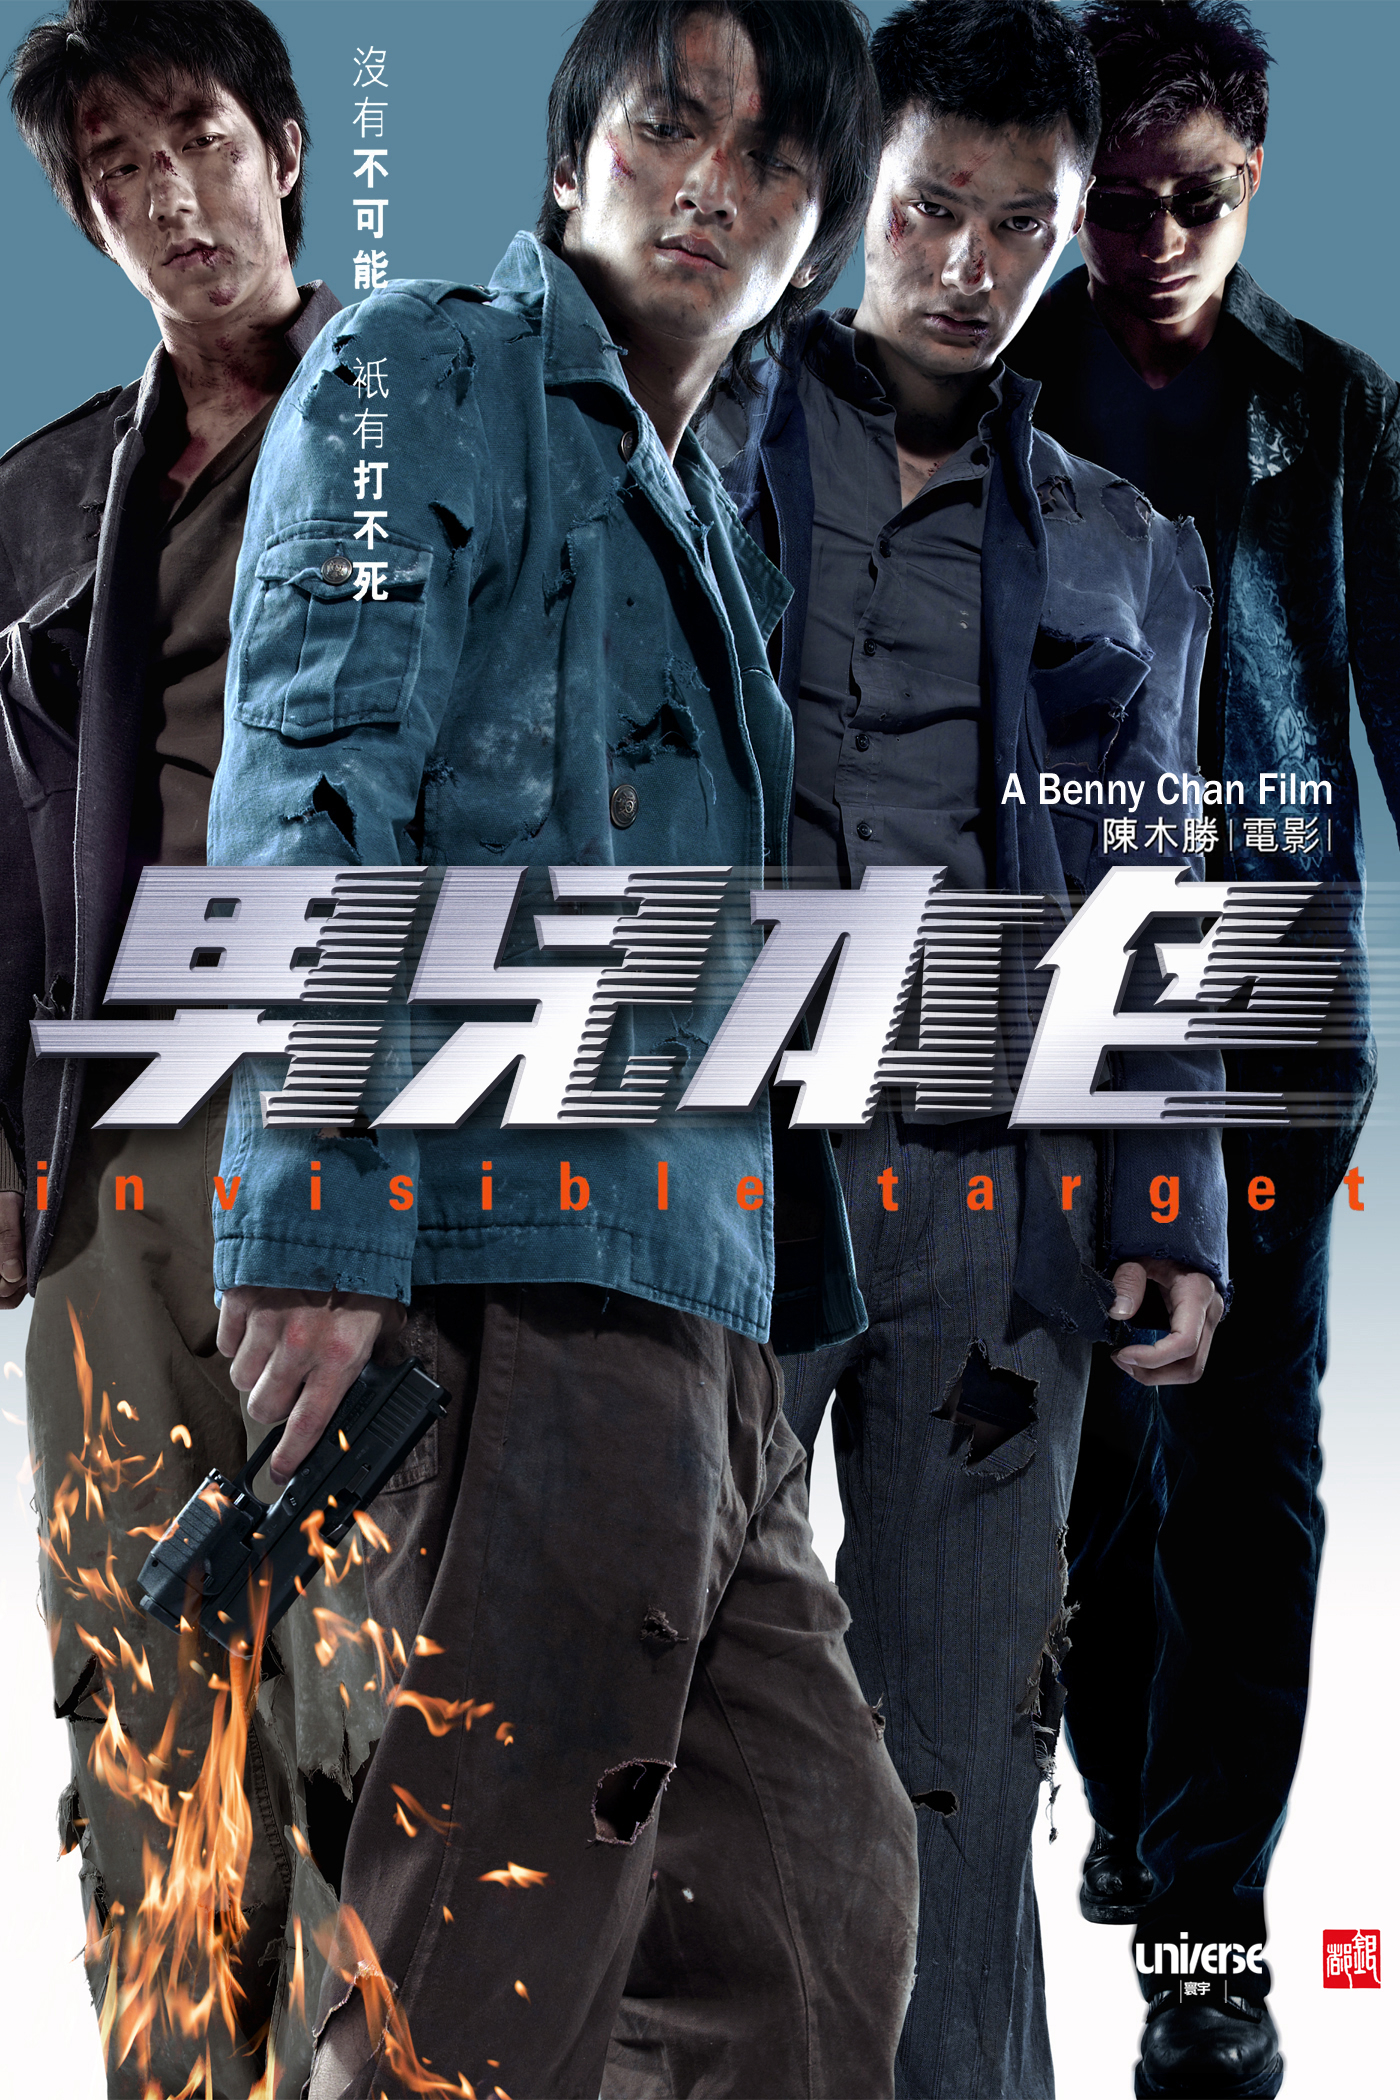 Poster Phim Bản Sắc Anh Hùng (Invisible Target)